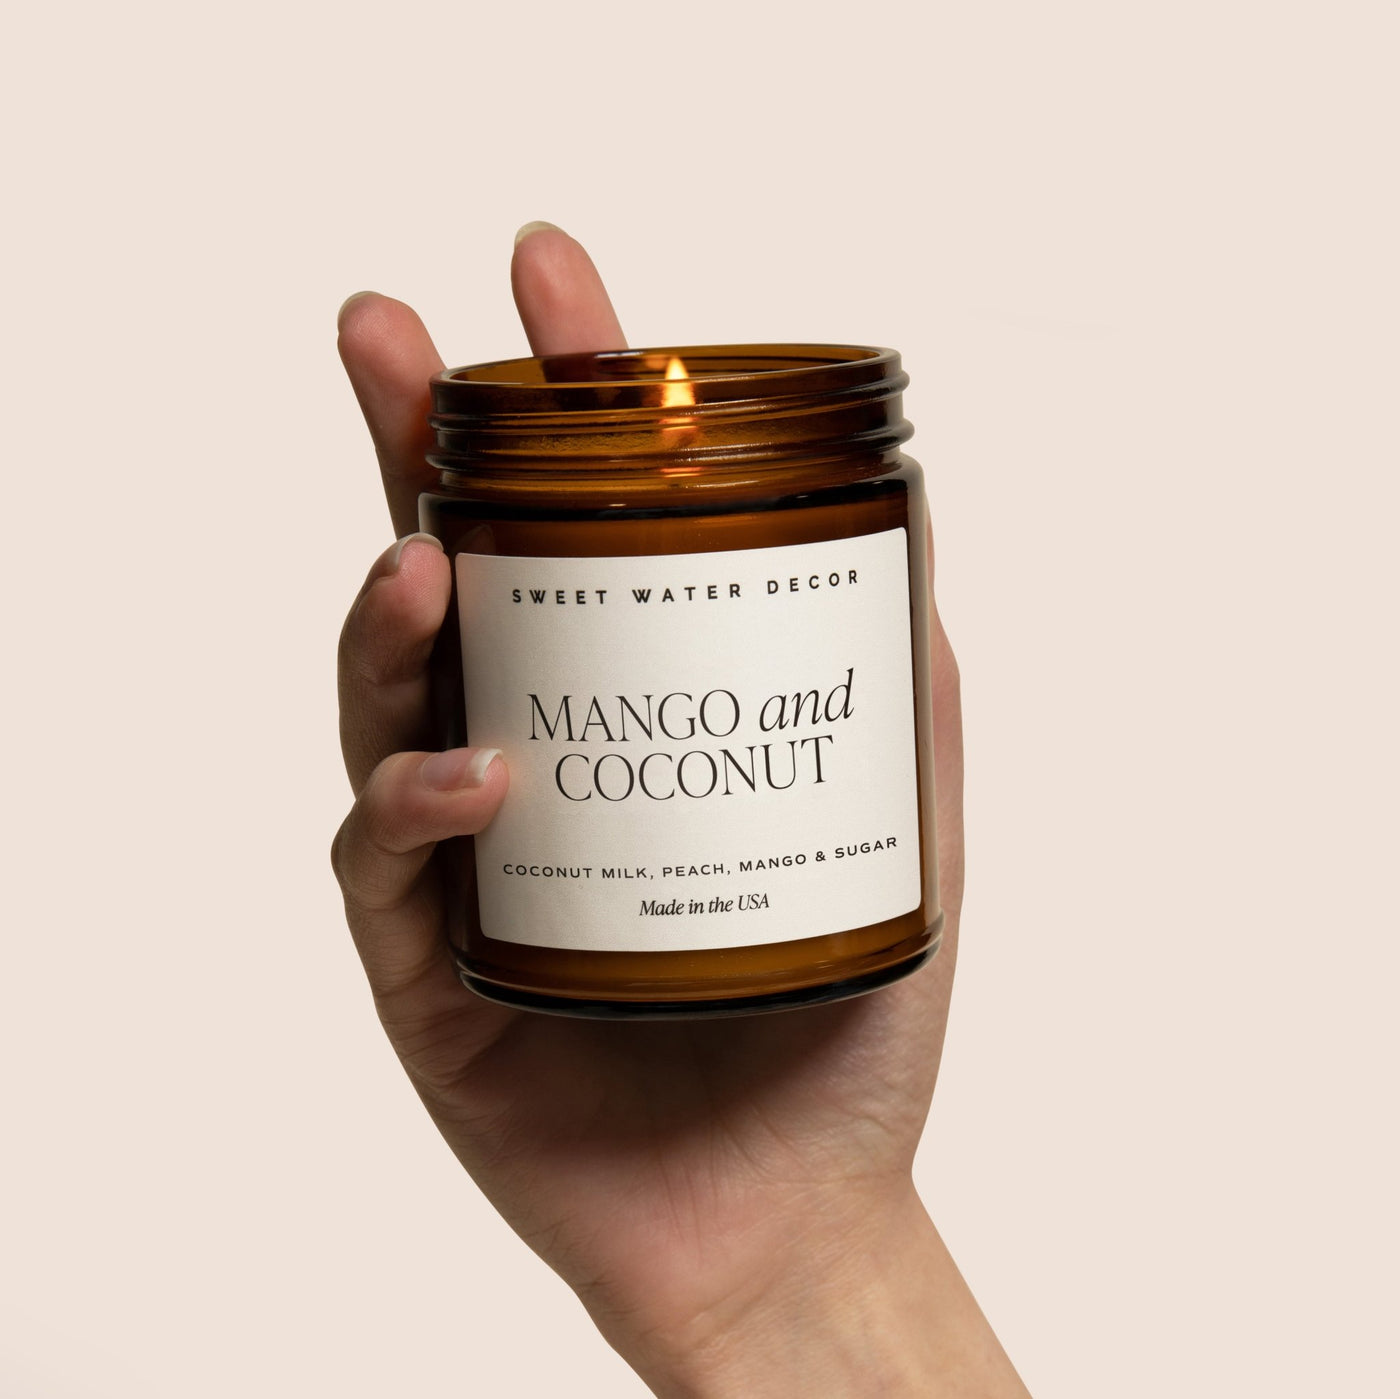 Mango and Coconut Soy Candle - Amber Jar - 9 oz - Sweet Water Decor - Candles